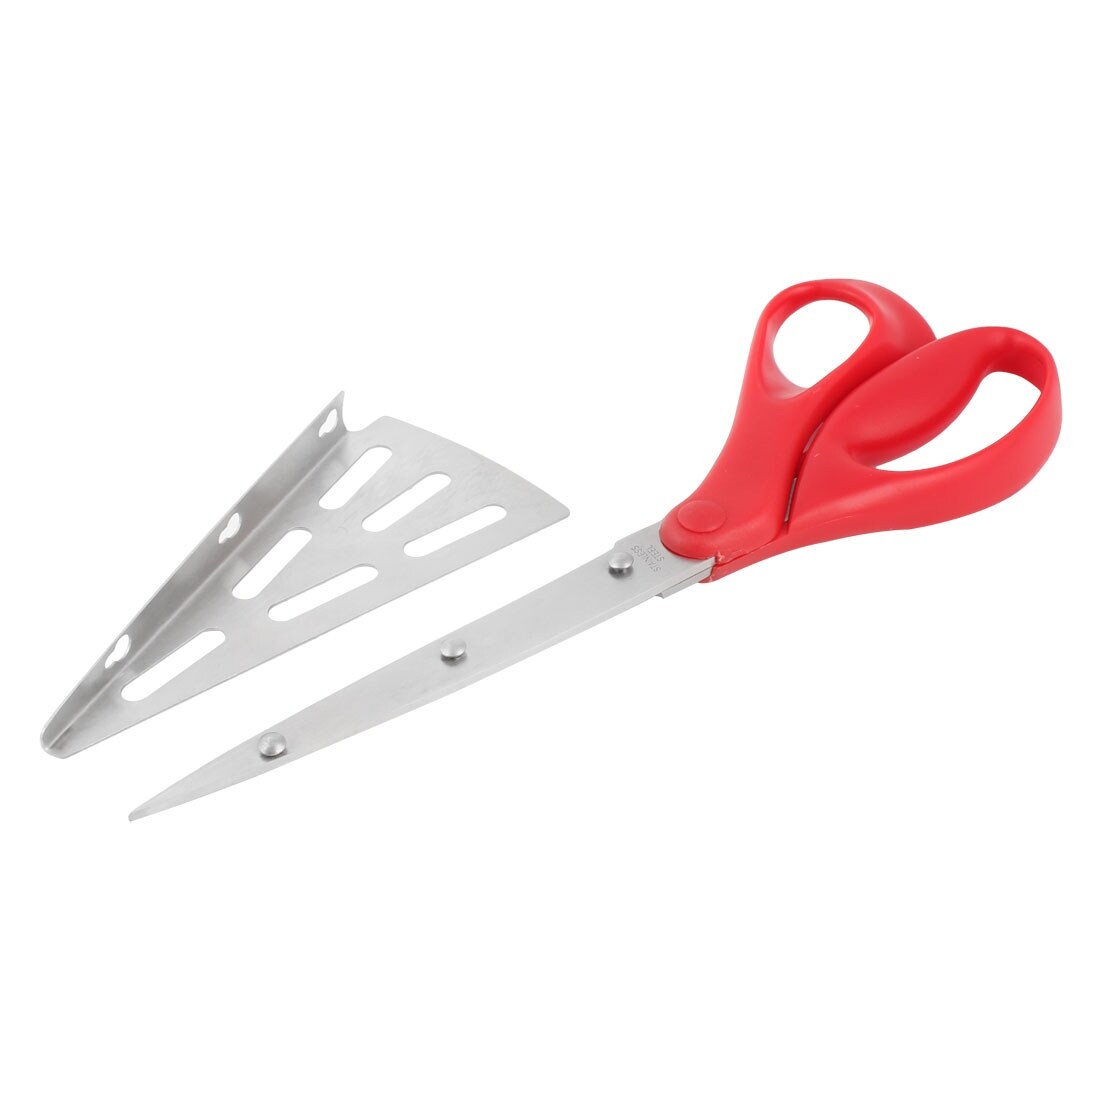 Bakery Plastic Grip Pizza Cutter Shears Clippers Food Scissors Slicing Tool  - Bed Bath & Beyond - 18341544